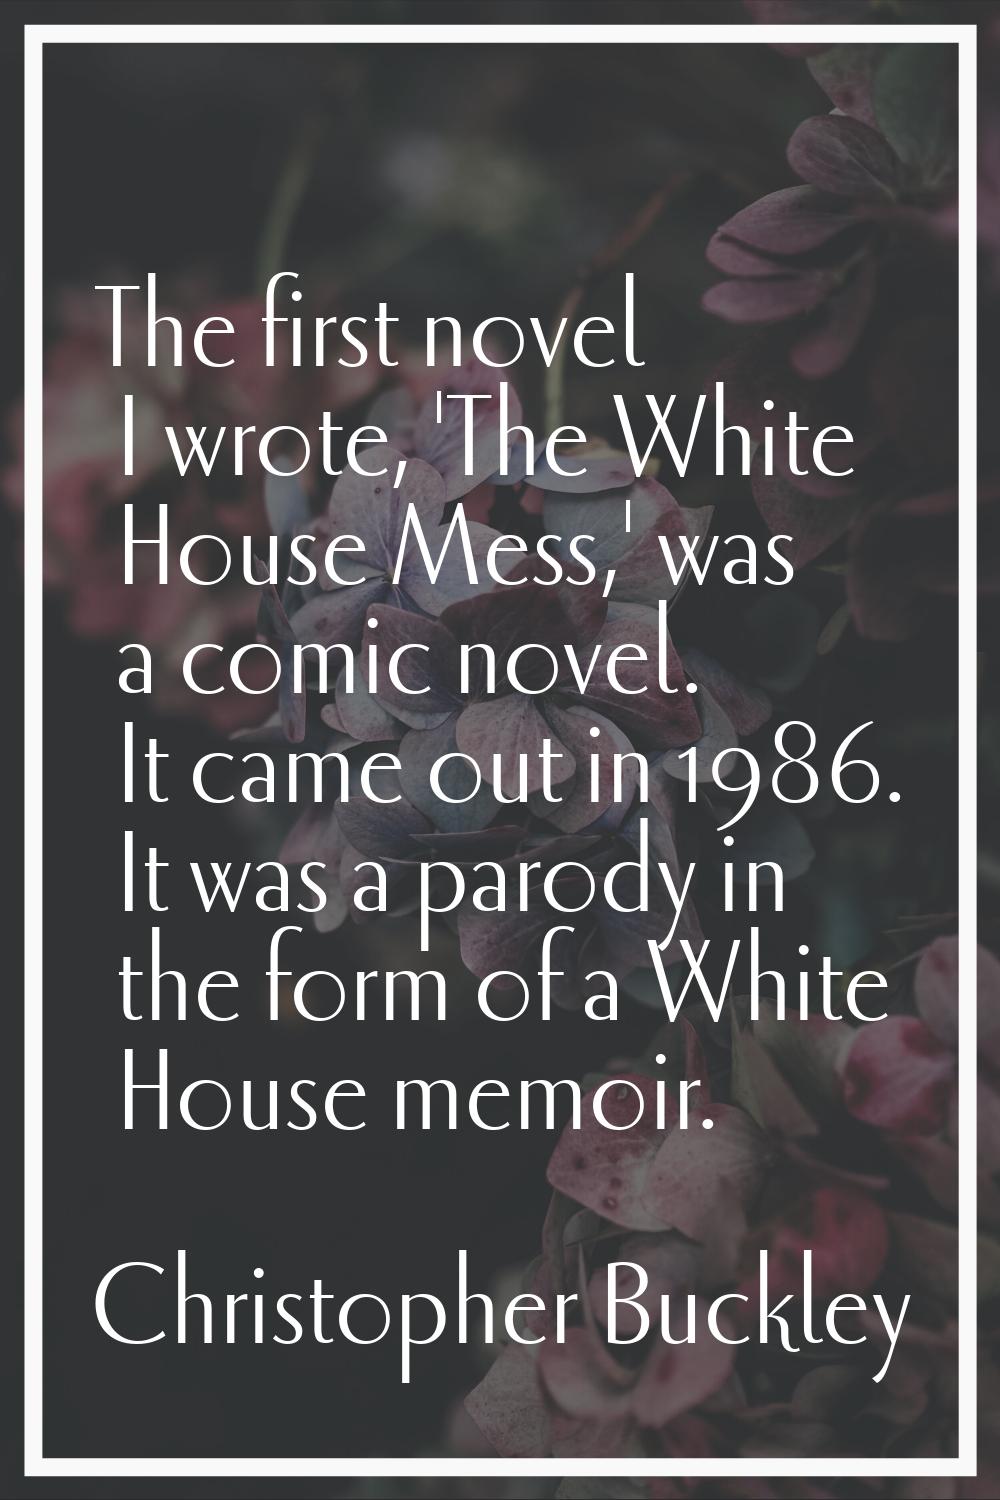 The first novel I wrote, 'The White House Mess,' was a comic novel. It came out in 1986. It was a p